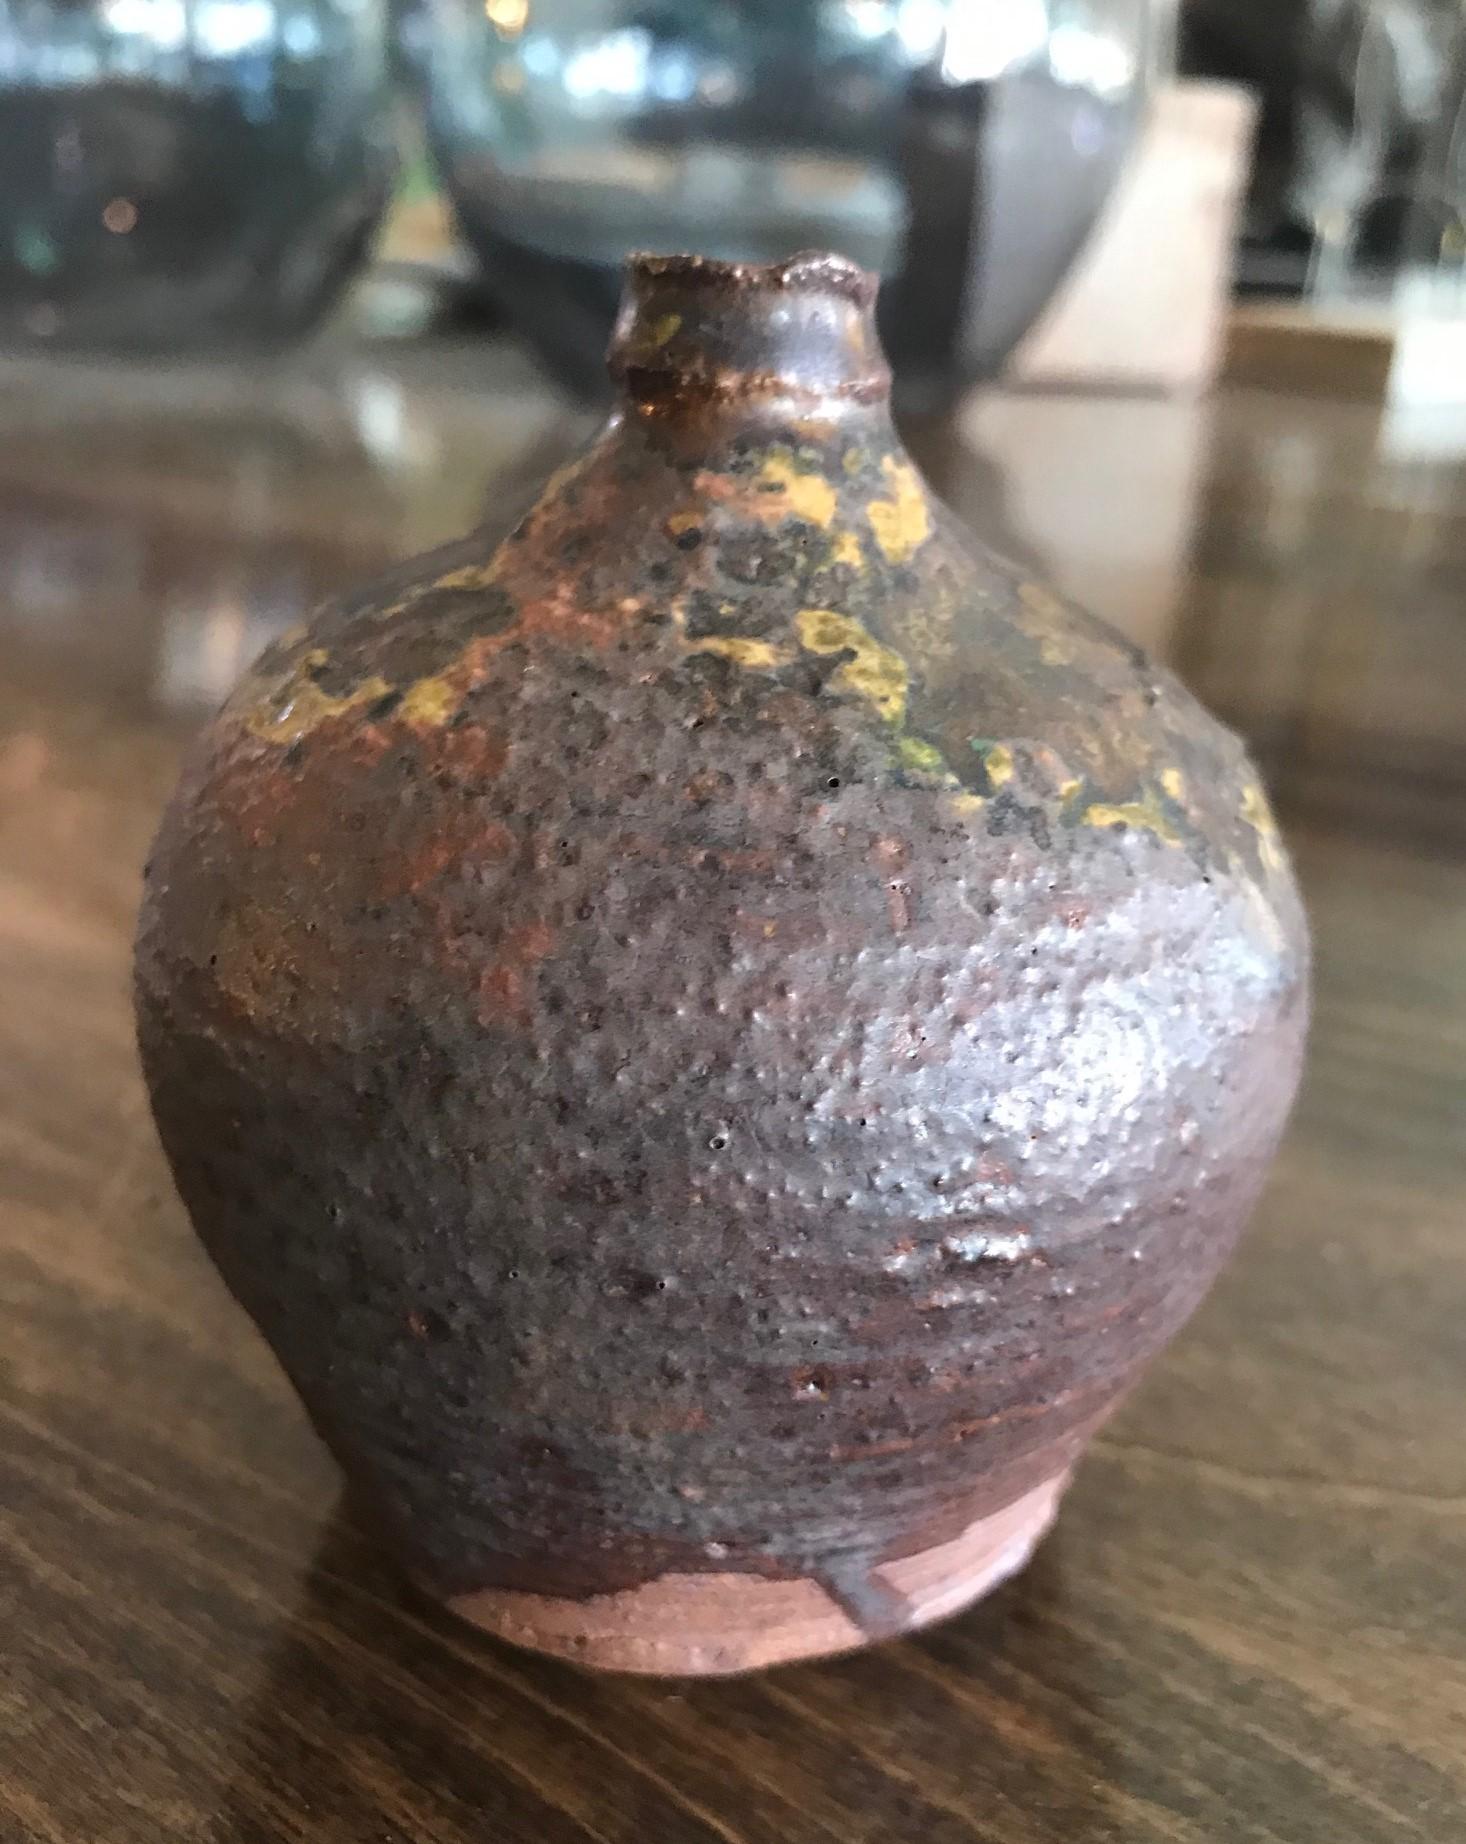 A wonderful gem of a piece. Beautifully fired and colored.

Japanese Bizen-Yaki pottery which dates back hundreds of years (its heyday was in the 16th century) is recognizable by its rustic quality and imperfections that were said to mirror those